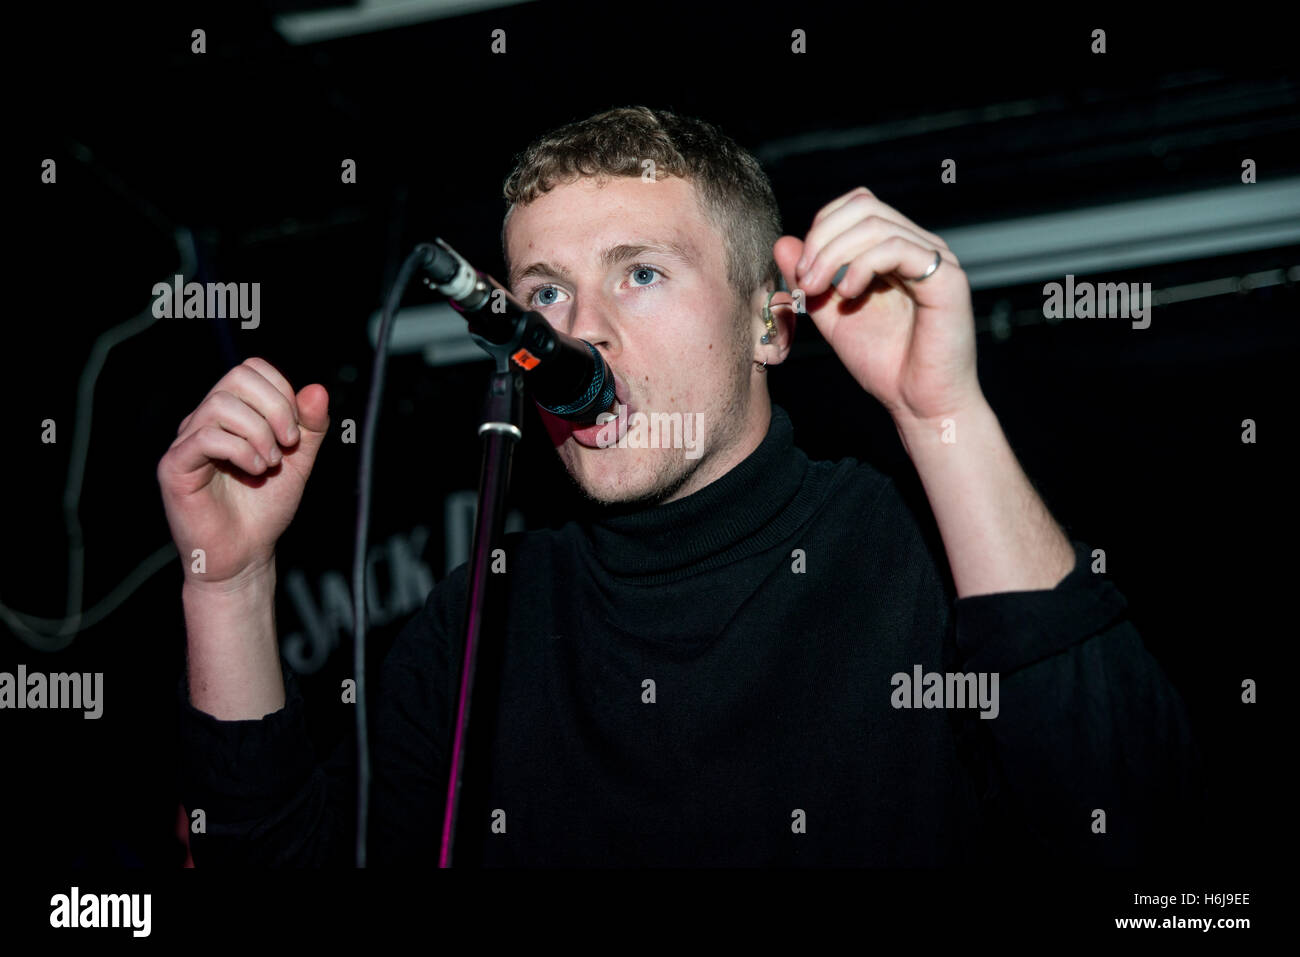 London UK, 29th October 2016. Young Kato perform at Amersham Arms for the 10th anniversary of This Feeling. Young Kato are a British six-piece indie pop band from Cheltenham, England. Formed in 2011, the band consists of Tommy Wright, Jack Edwards, Joe Green, Joe Lever, Harry Steele and Sam Henderson. Credit:  Alberto Pezzali/Alamy Live news Stock Photo